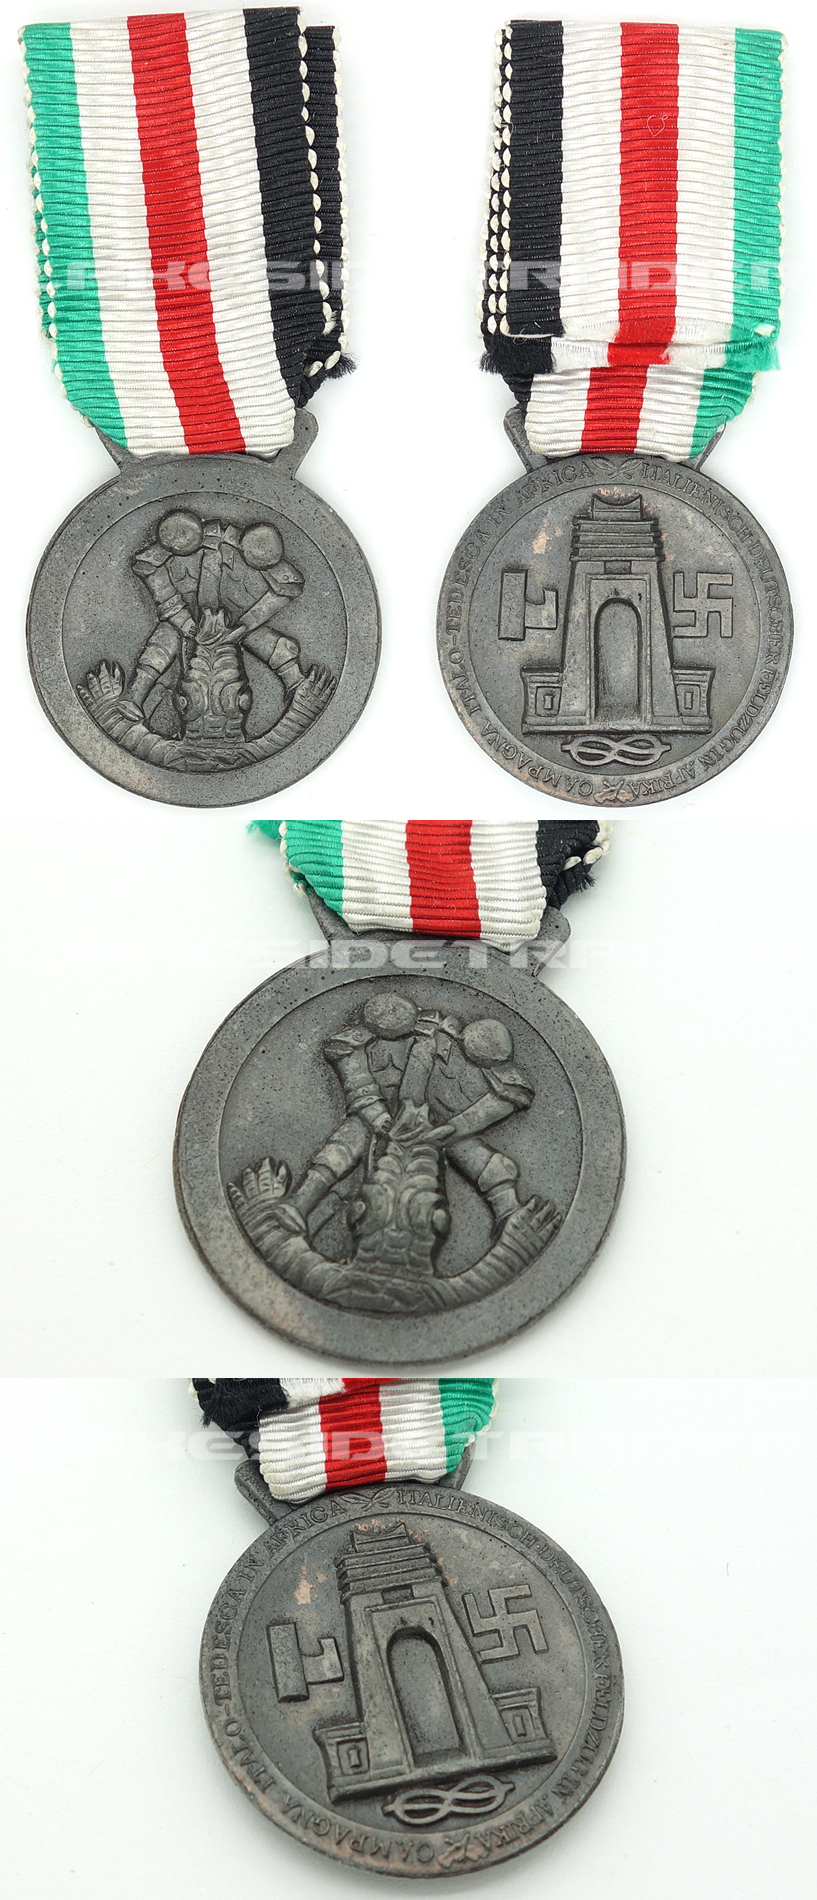 Italian-German African Campaign Medal - Type 6